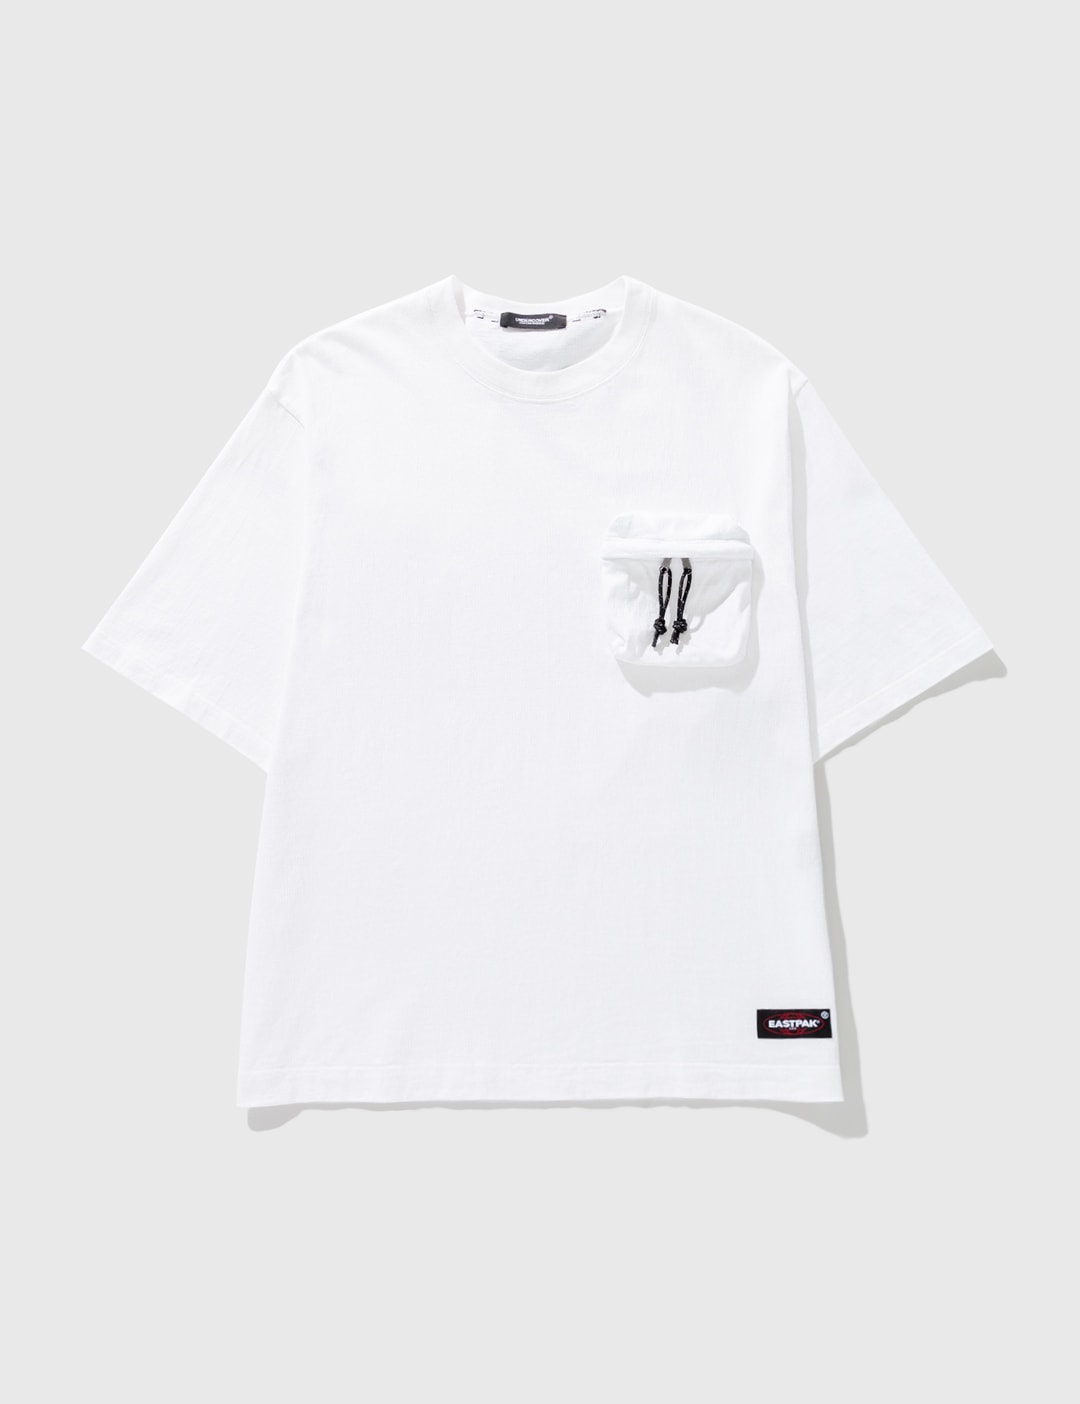 Aan boord delen reflecteren Undercover - Undercover x Eastpak White Cargo T-shirt | HBX - Globally  Curated Fashion and Lifestyle by Hypebeast